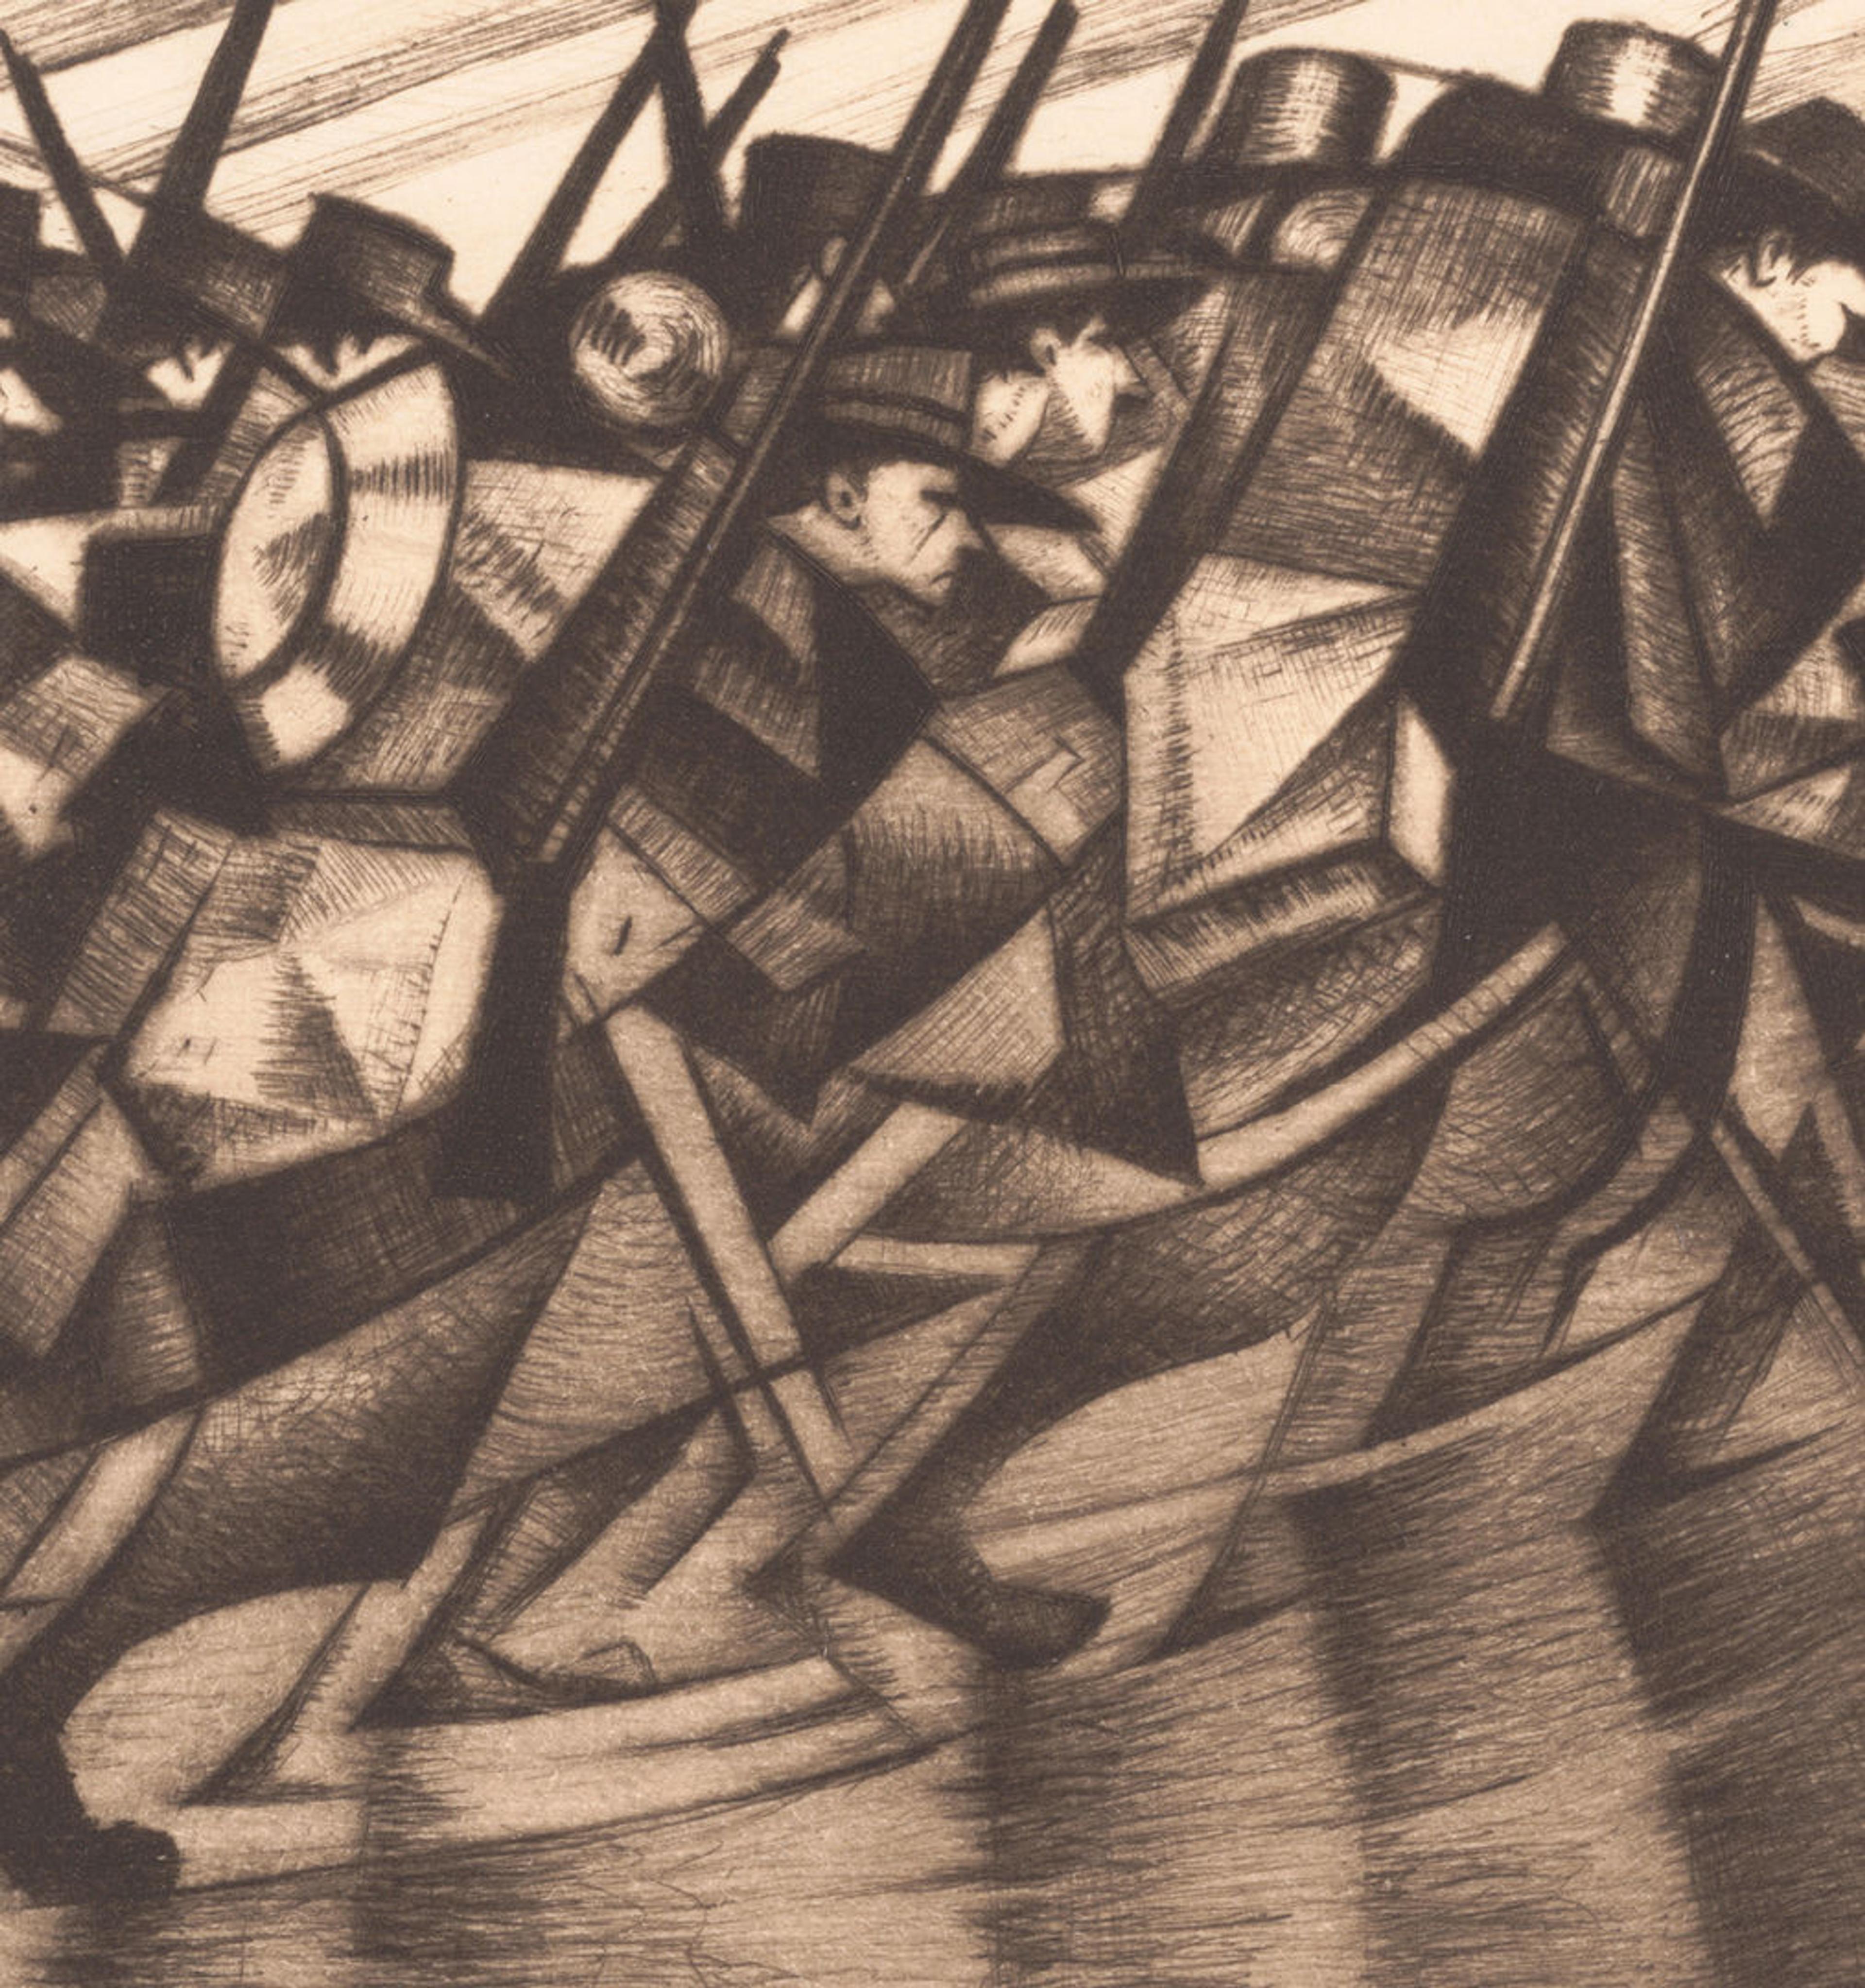 Early 20th-century drypoint depicting a number of soldiers on the way to battle